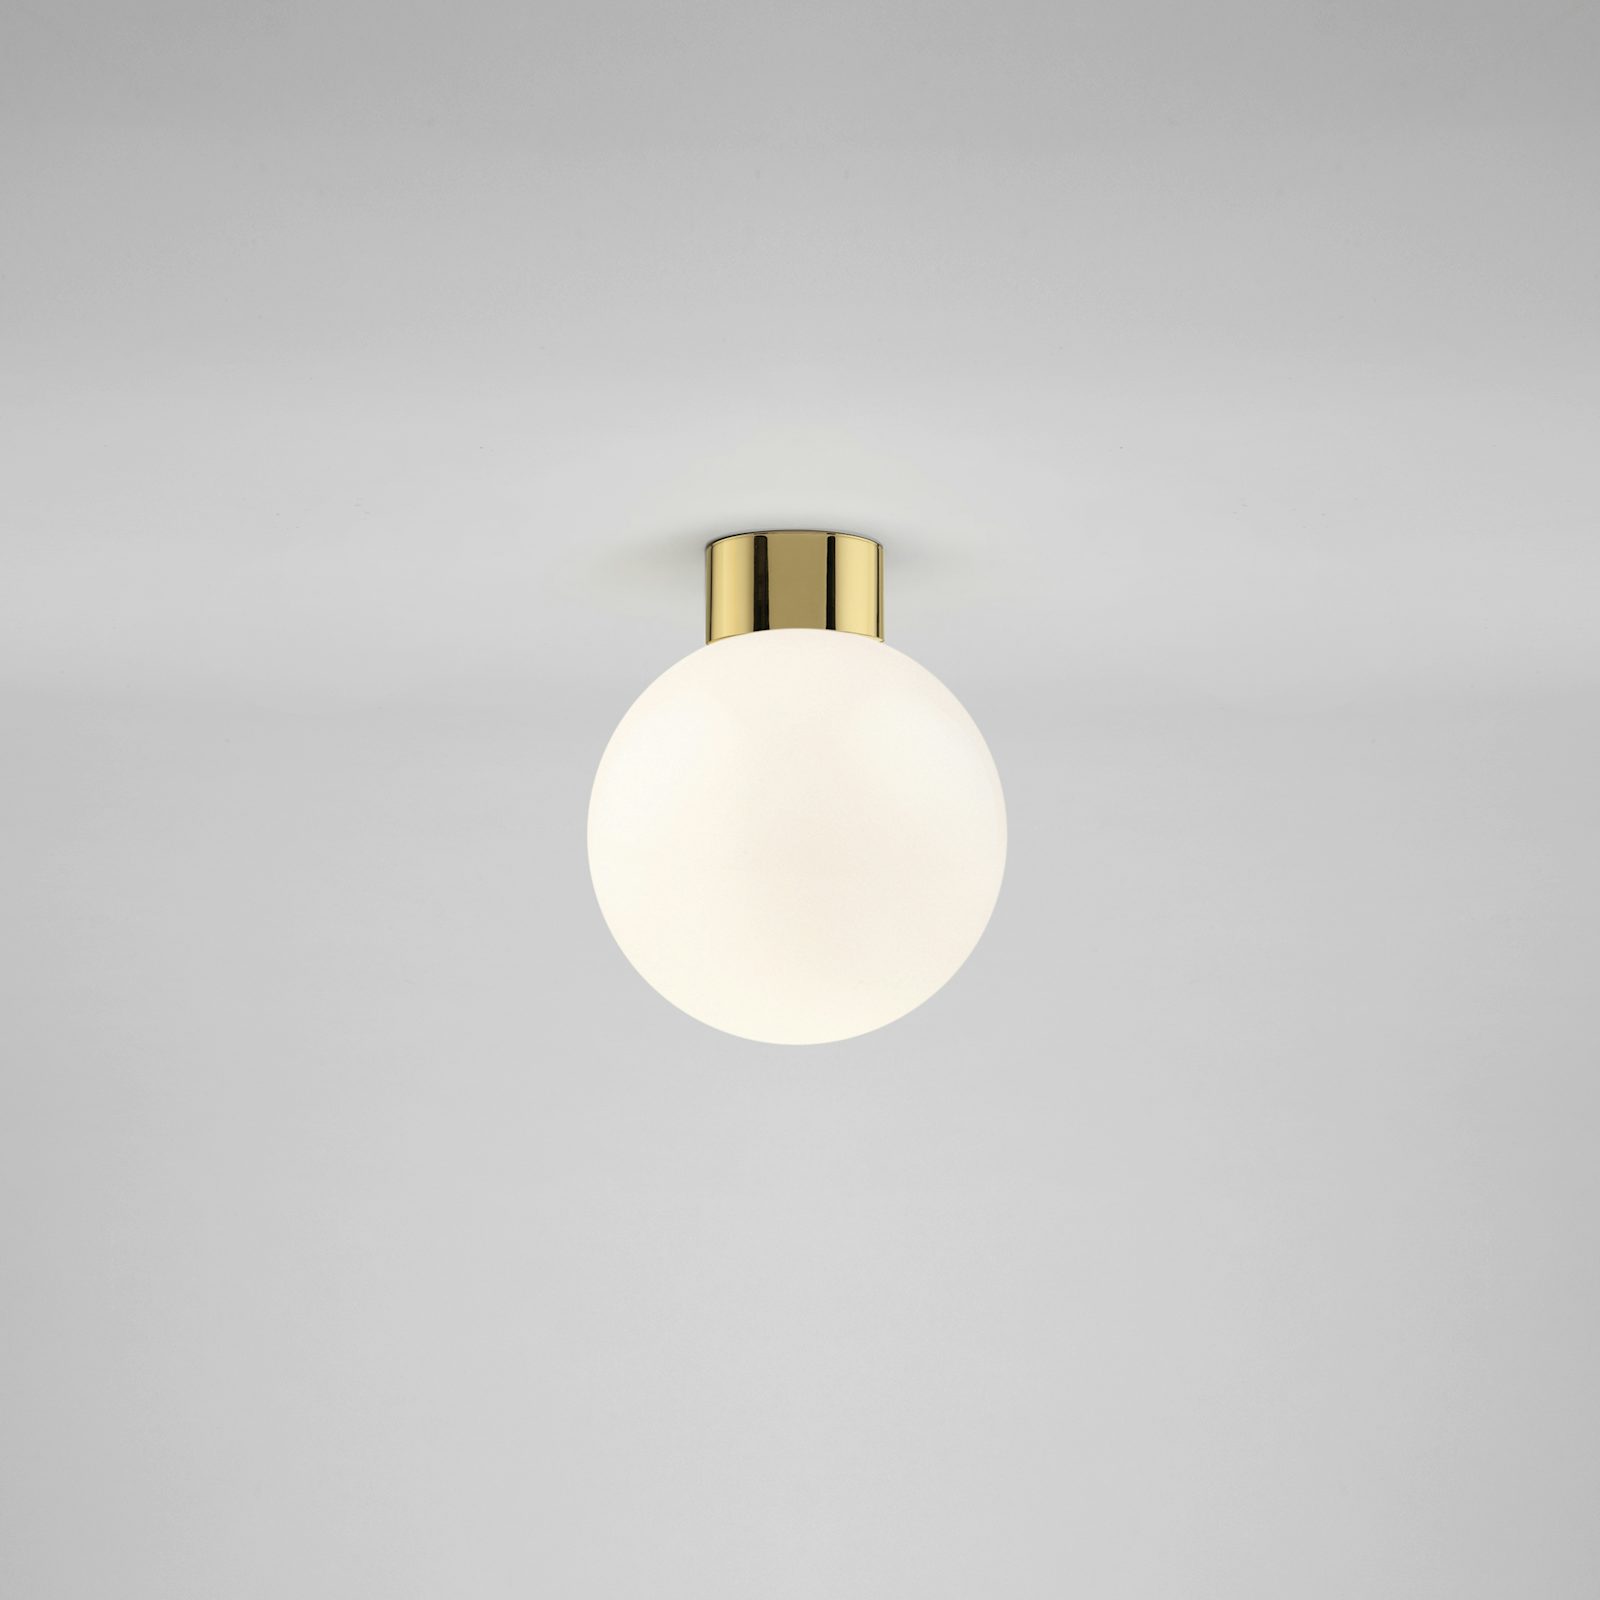 Brass Architectural Collection P350 - Collection - Michael Anastassiades